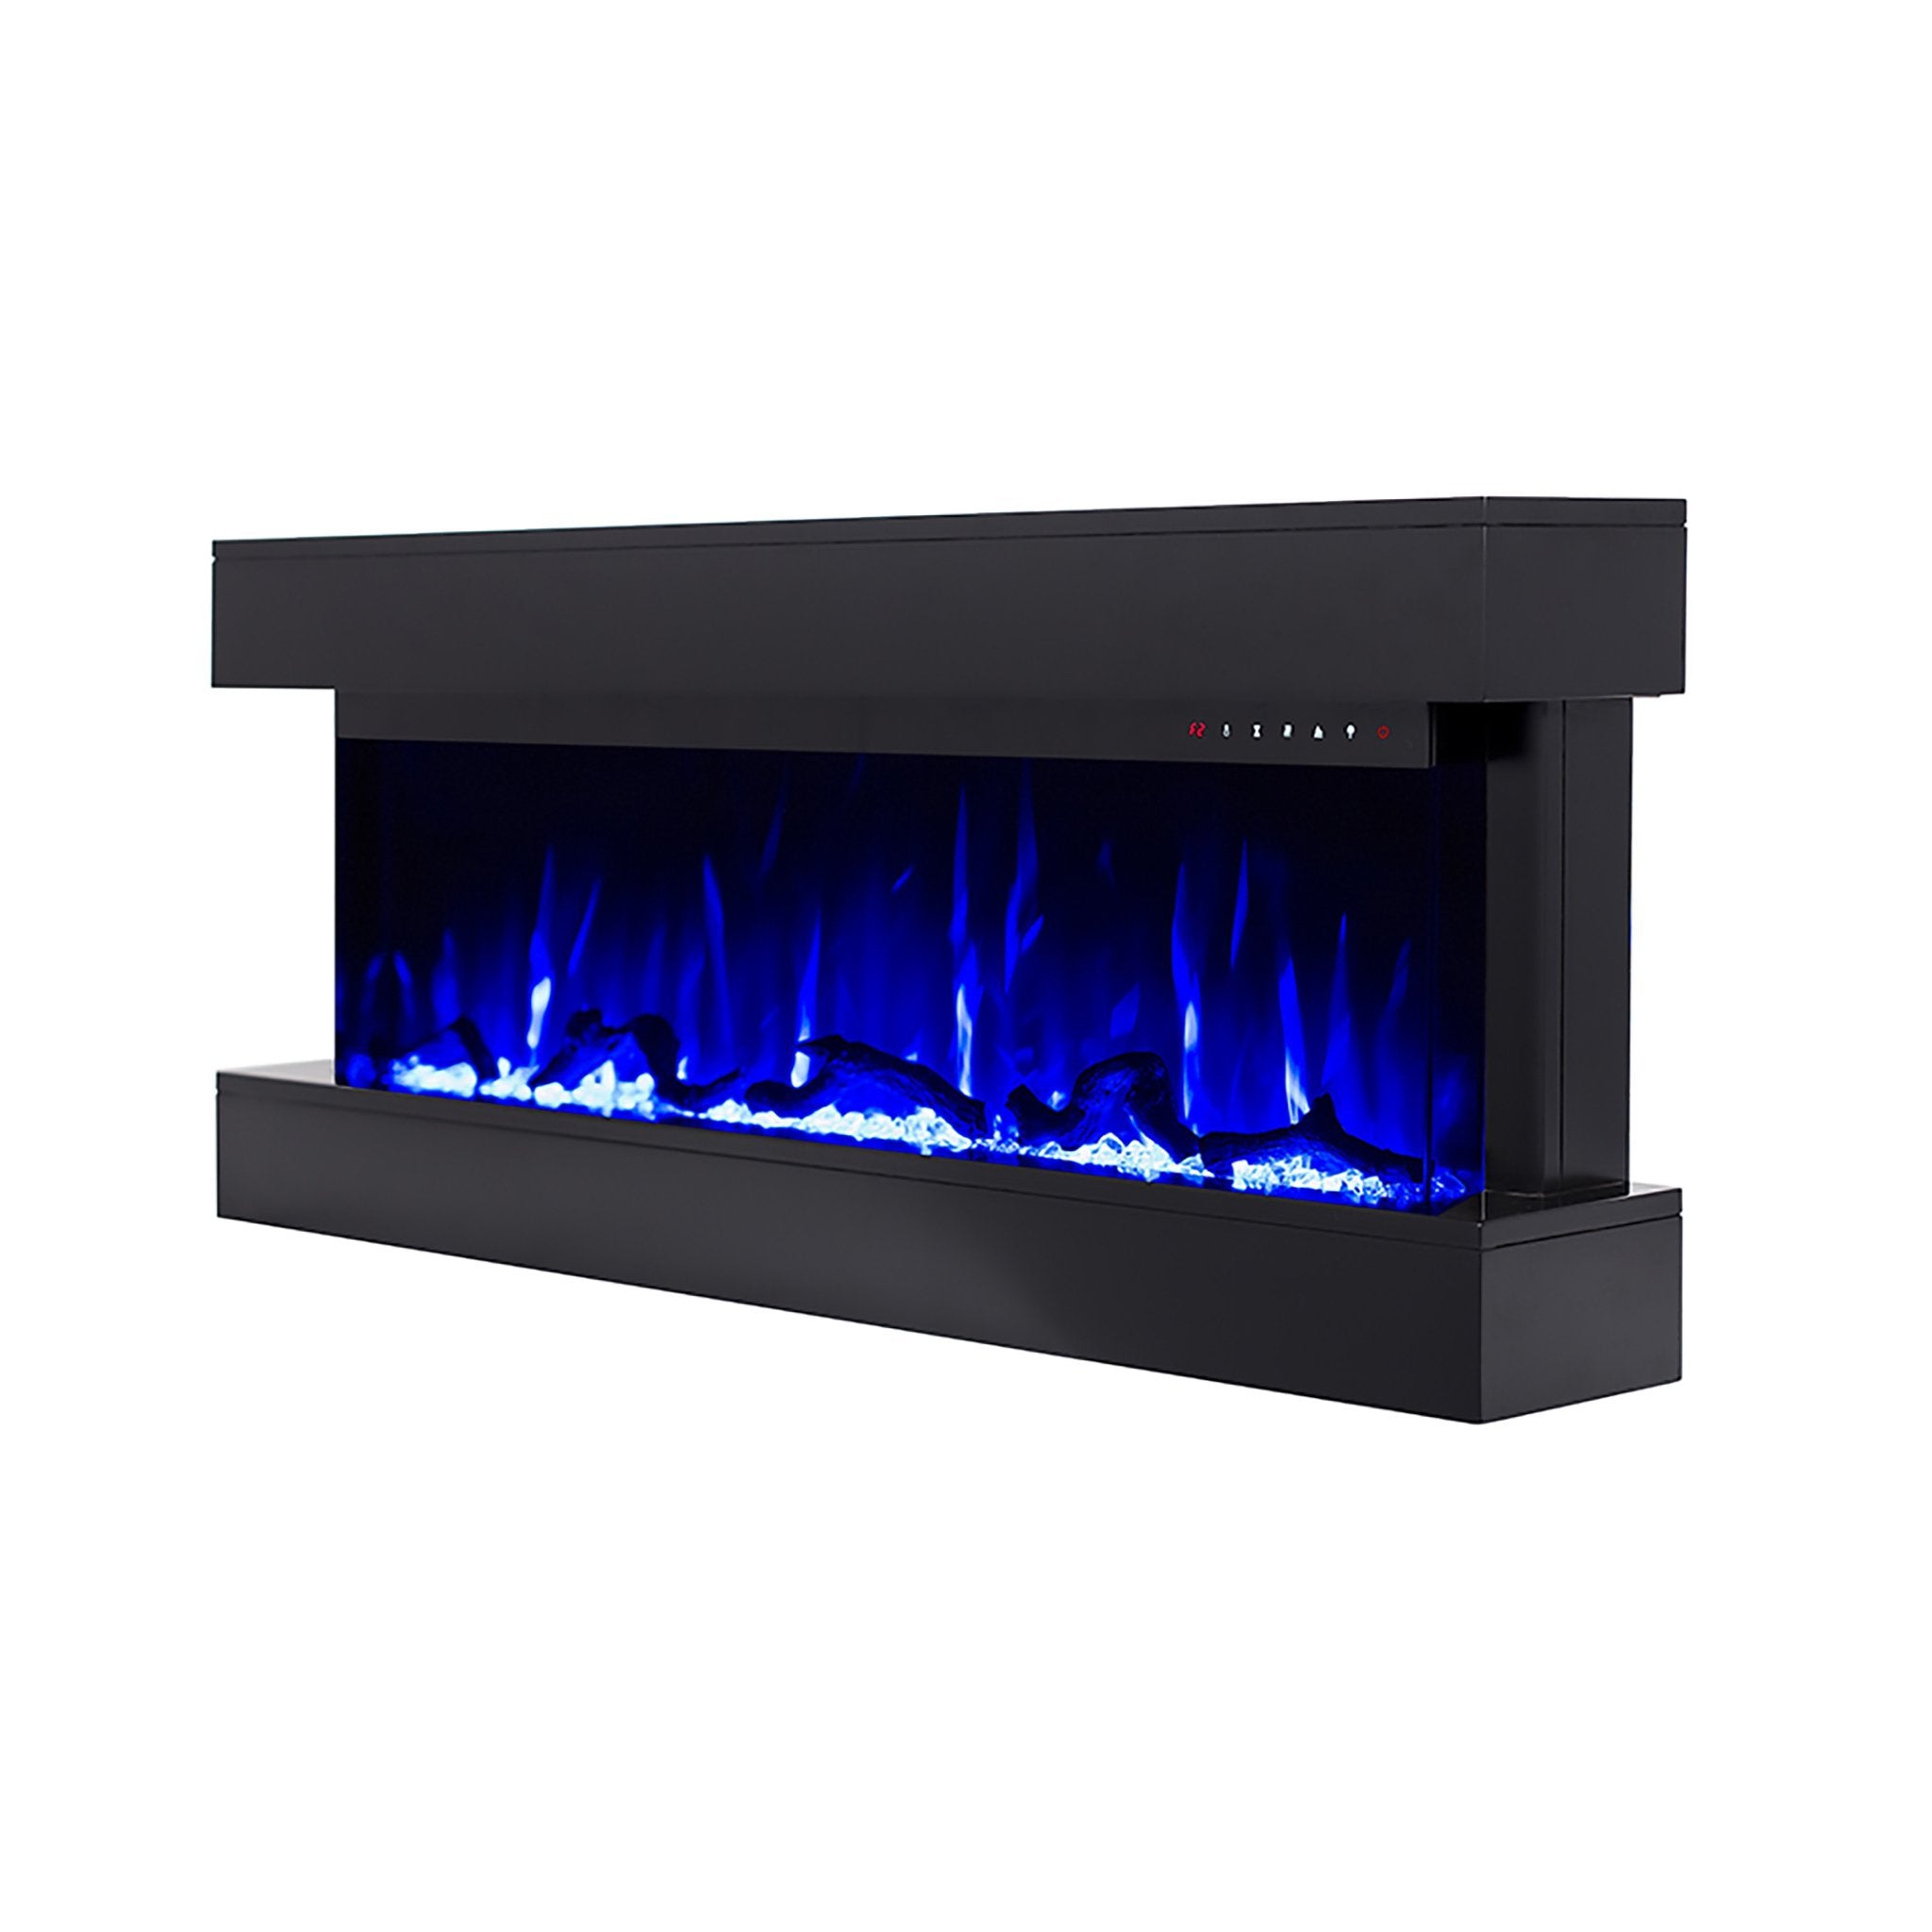 Chesmont White  80033 Wall Mount 3-Sided Smart Electric Fireplace blue flames.